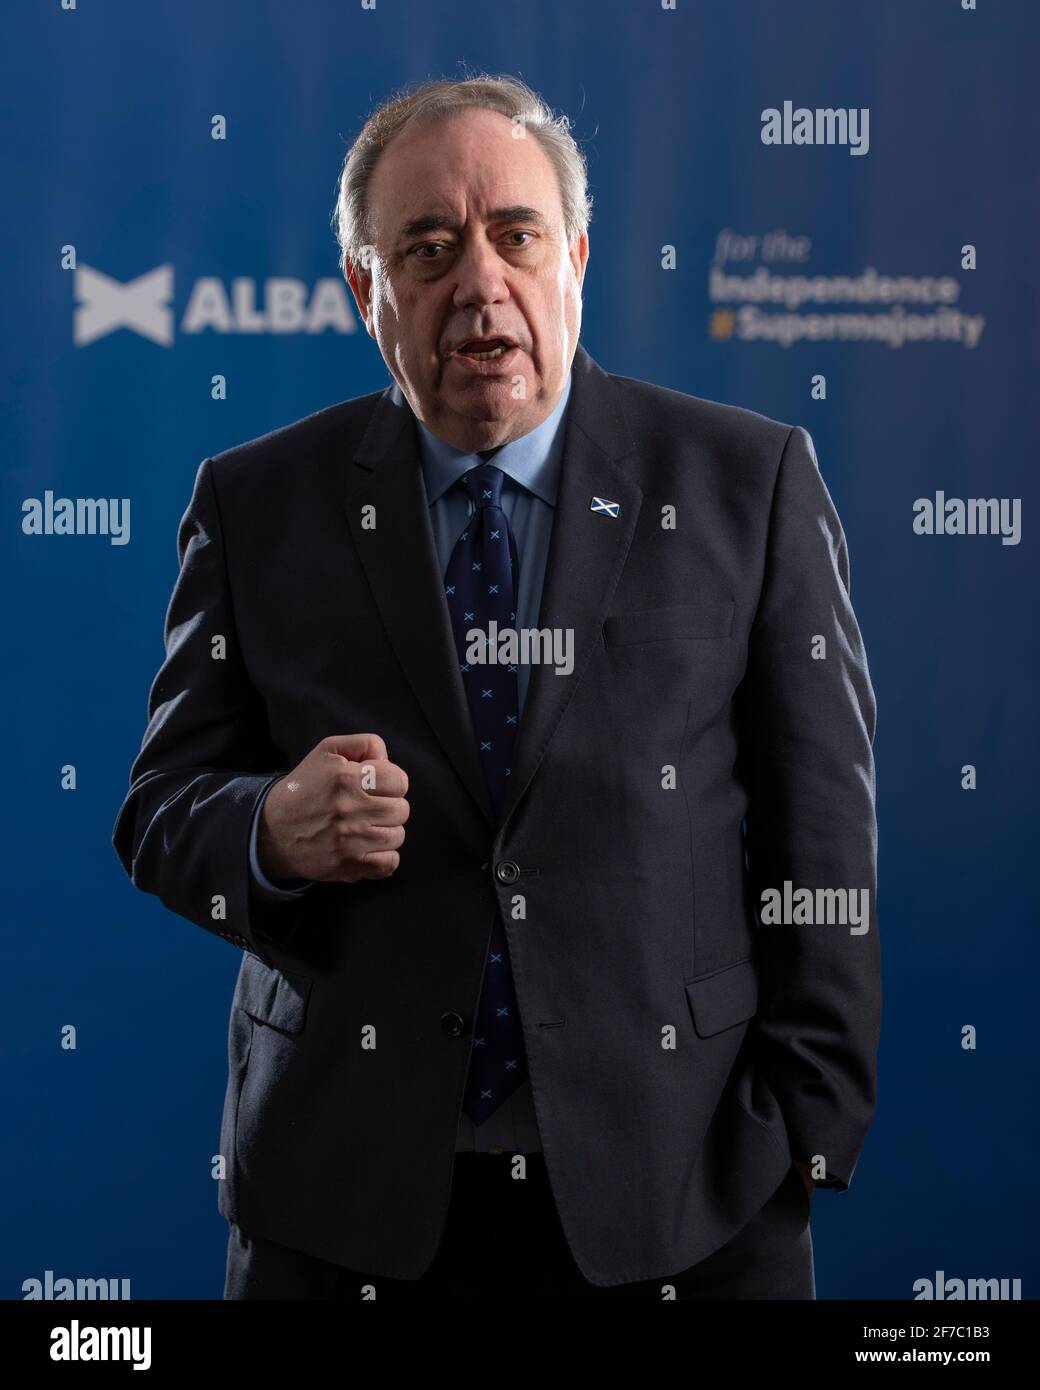 Aberdeenshire, Scotland, UK. 6th Apr, 2021. PICTURED: Alex Salmond, Leader of the Alba Party and Former First Minister of Scotland and former Leader of the Scottish National Party (SNP). Alex Salmond is the Candidate for North East Scotland for the Alba Party. Credit: Colin Fisher/Alamy Live News Stock Photo